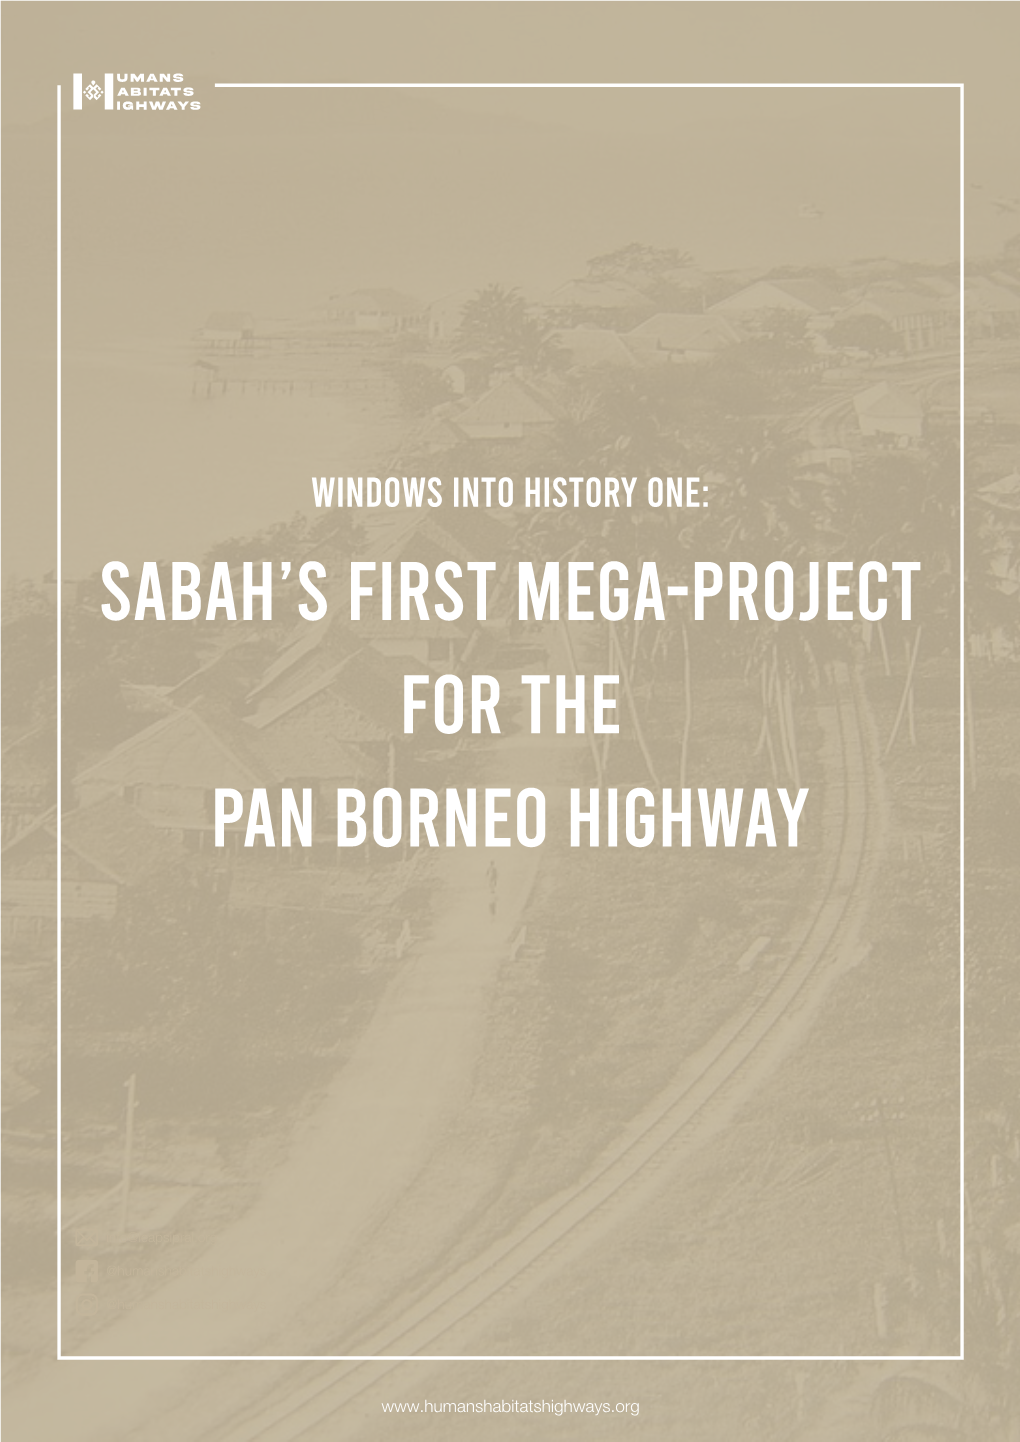 Sabah's First Mega-Project for the Pan Borneo Highway